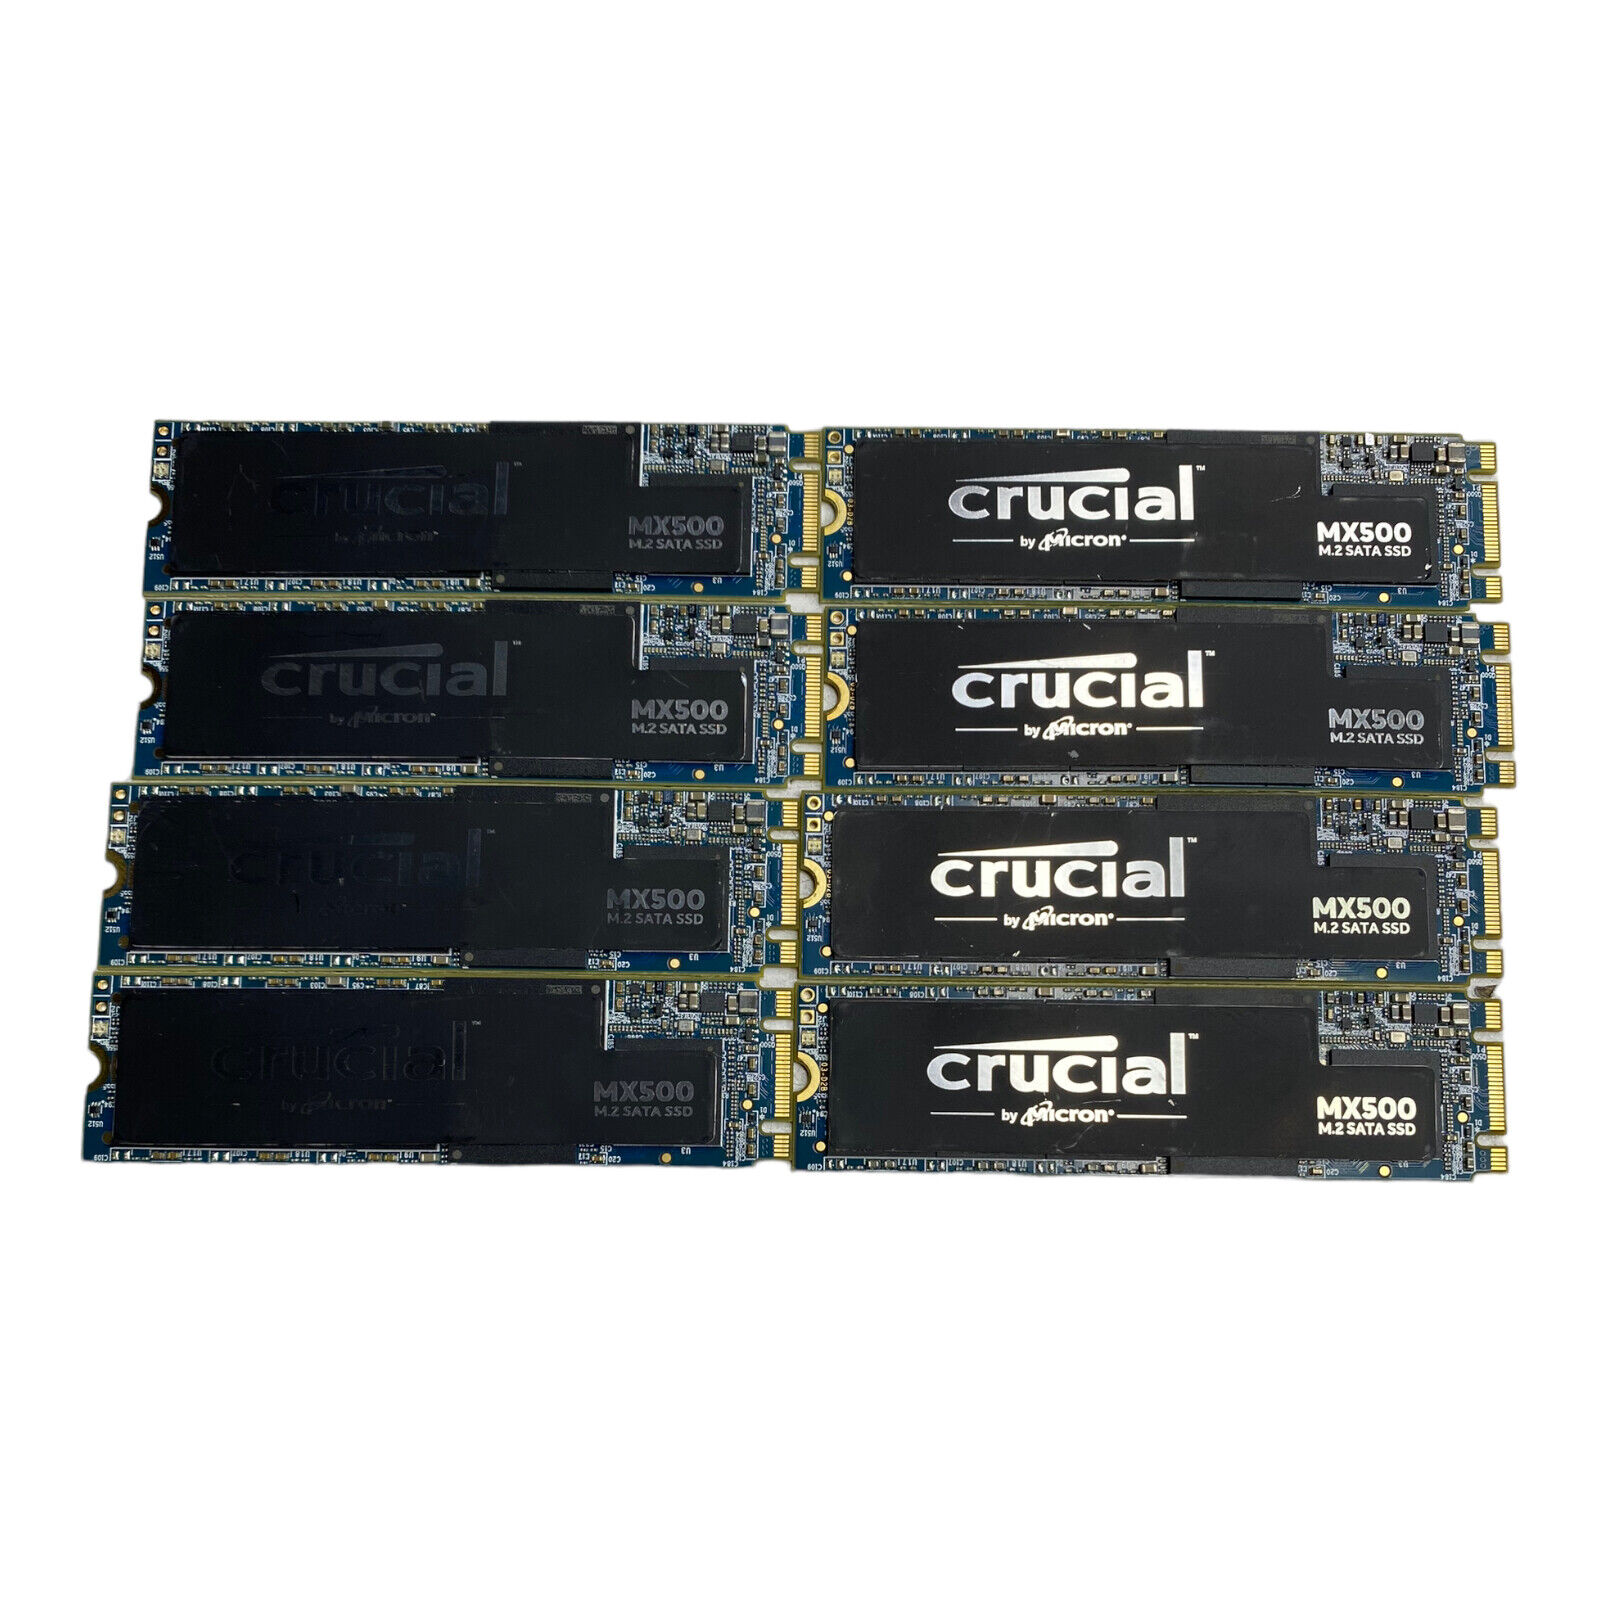 Lot of 10 Crucial MX500 250GB SATA M.2 SSD Solid State Drive